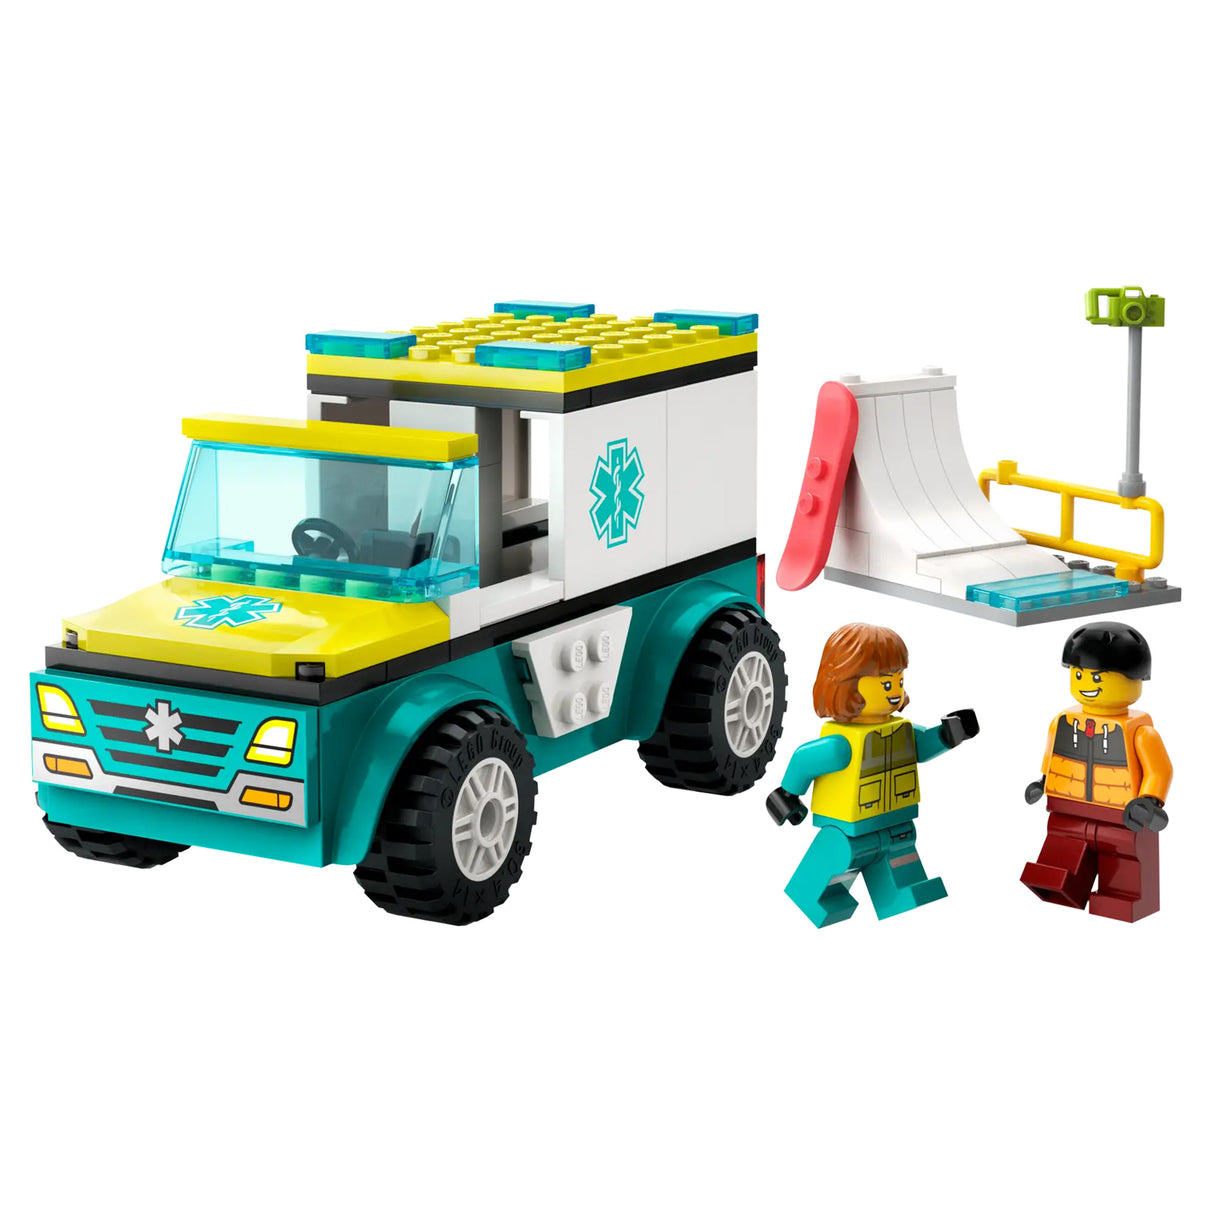 LEGO City Emergency Ambulance and Snowboarder 60403, (79-pieces)